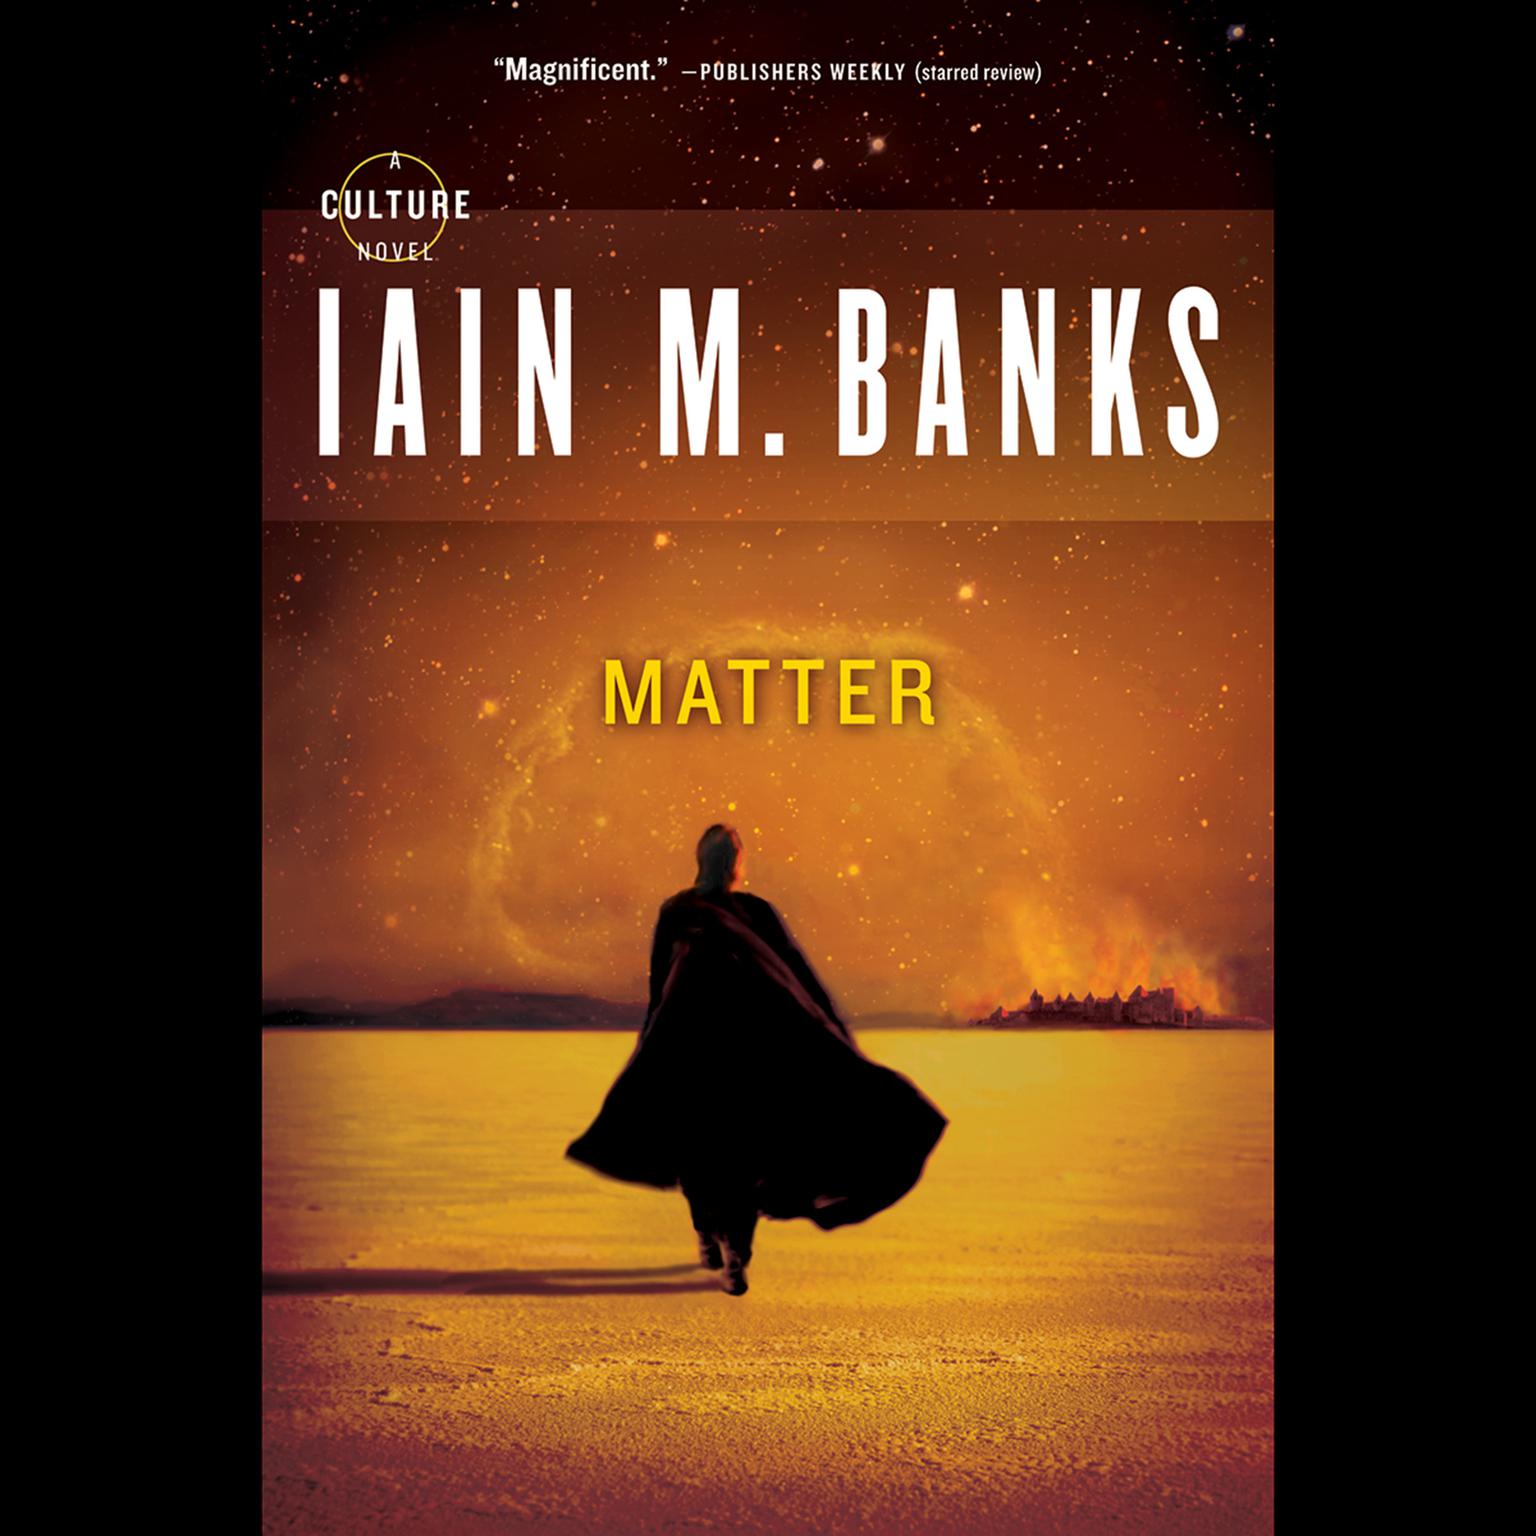 Matter Audiobook, by Iain Banks